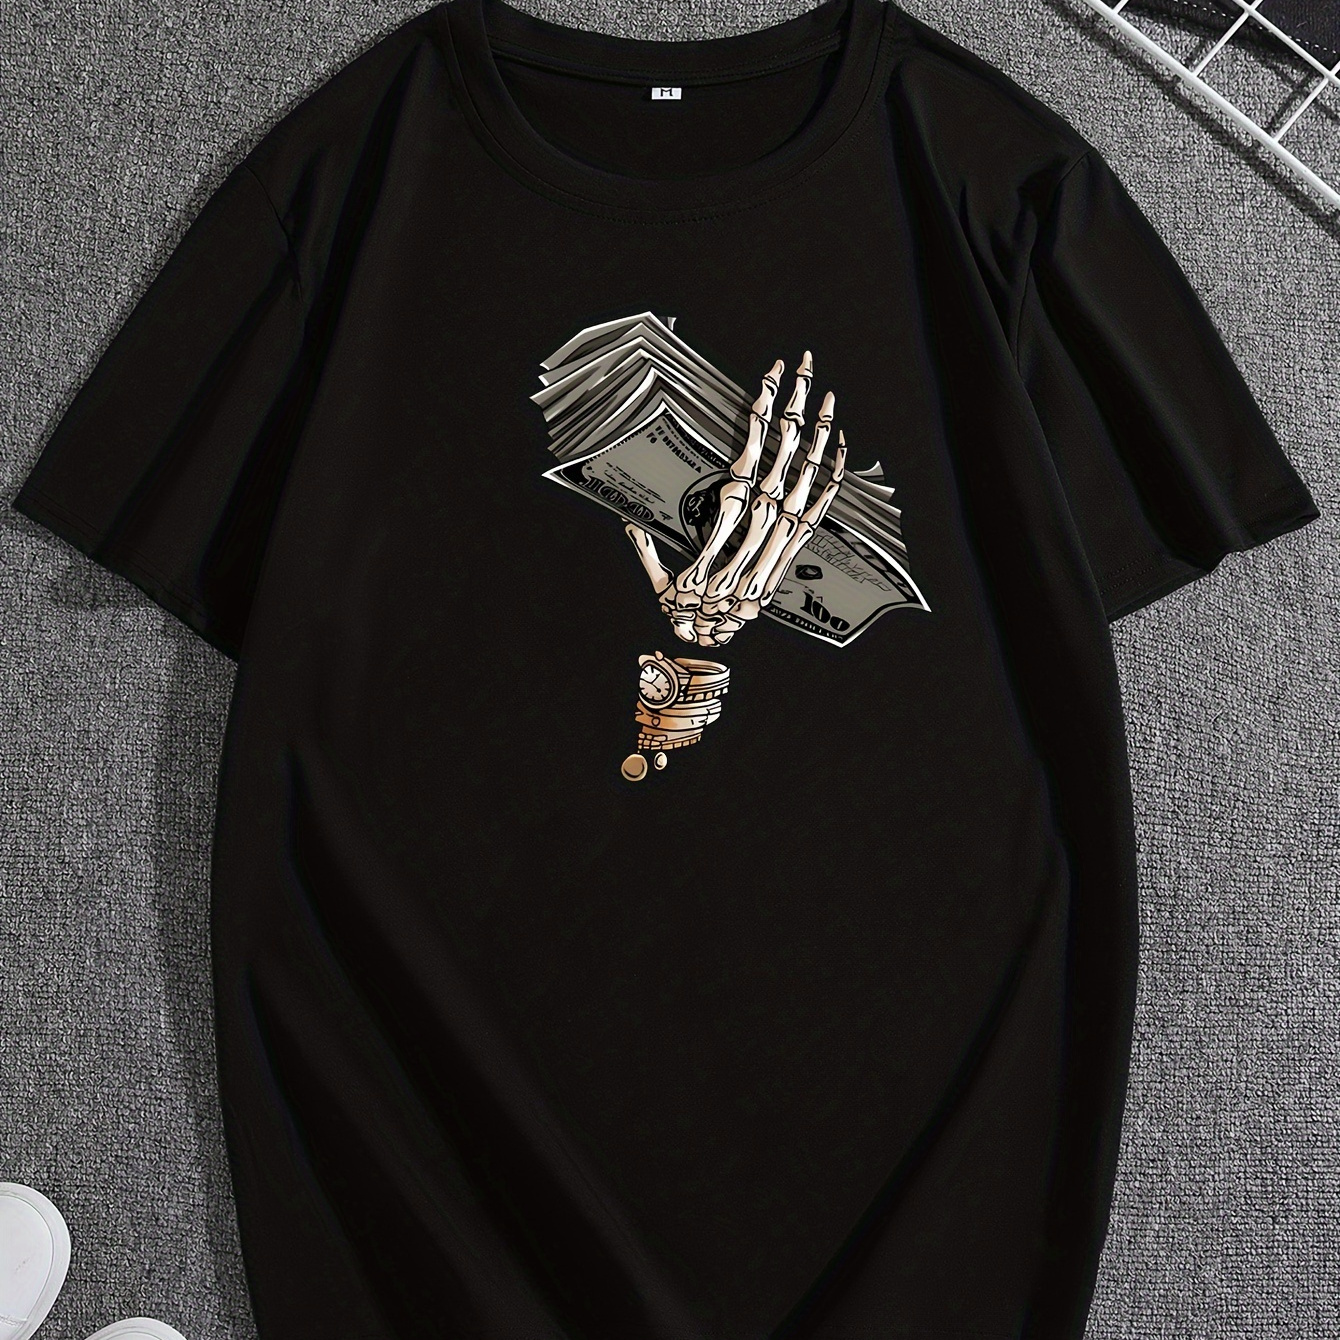 

Cartoon Skeletal Hand With Cash Graphic Print, Men's Novel Design T-shirt, Casual Comfy Tees For Summer, Men's Clothing Tops For Daily Activities